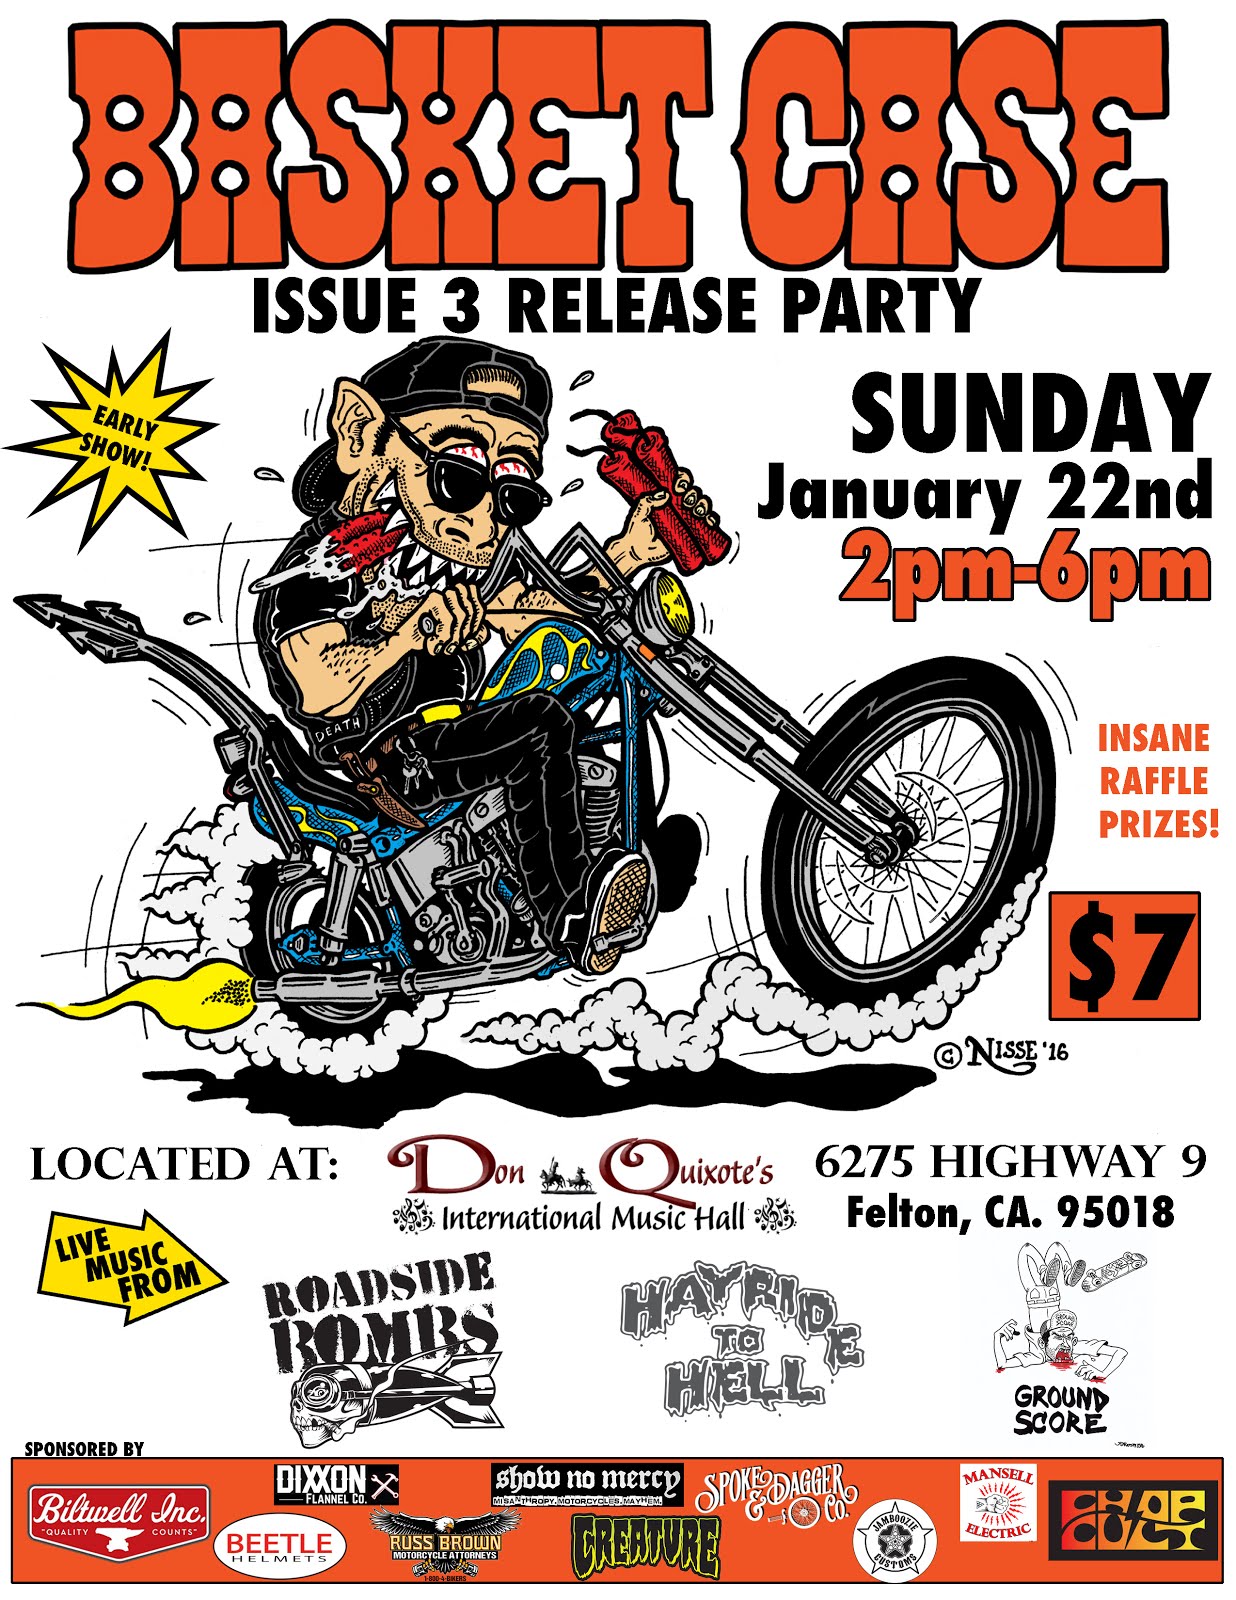 Rat Fink Choppers poster. Raffle Prizes. Rat Fink Bicycle. Issue release